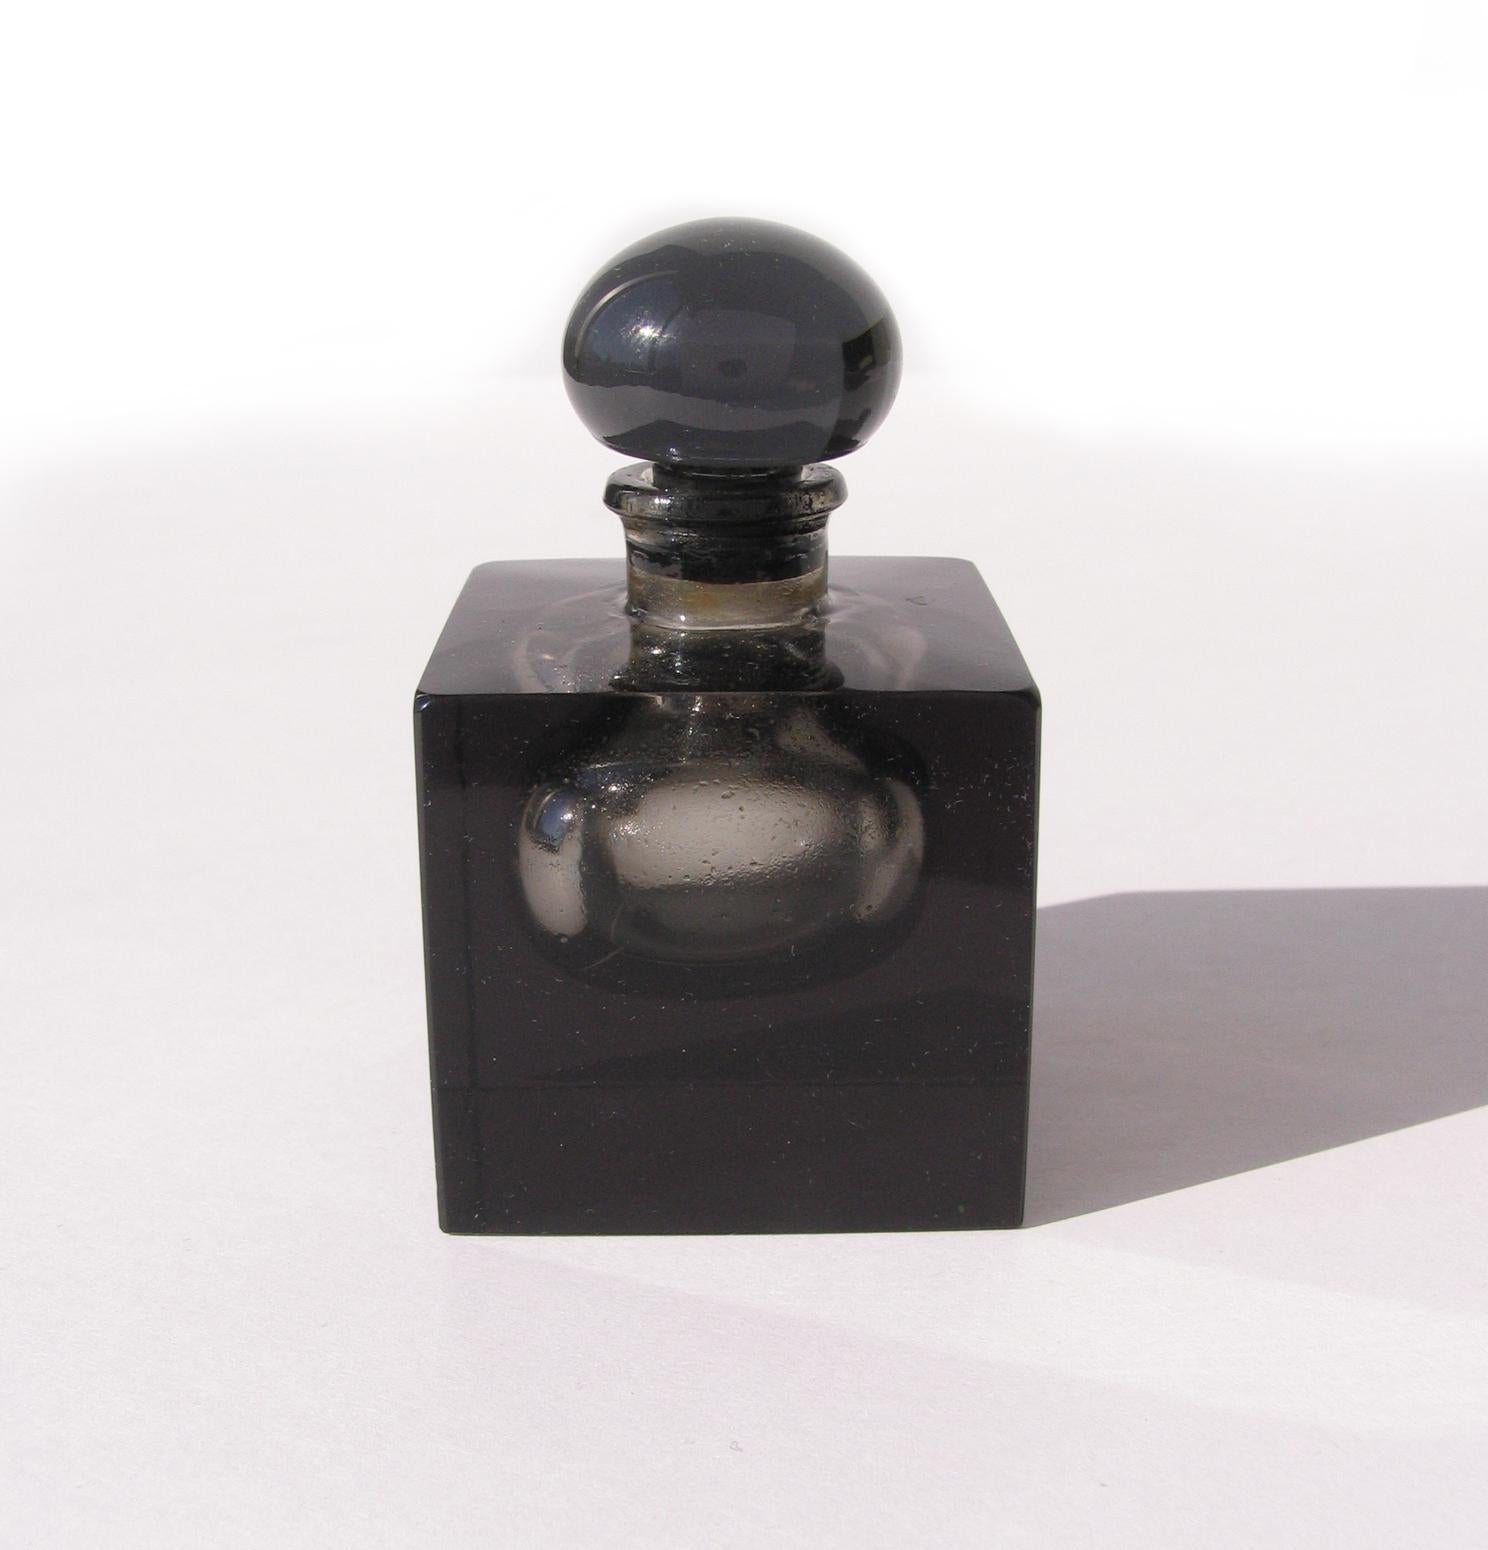 Art Deco square black glass perfume bottle with interior clear sphere. 
Round black glass bottle stopper.